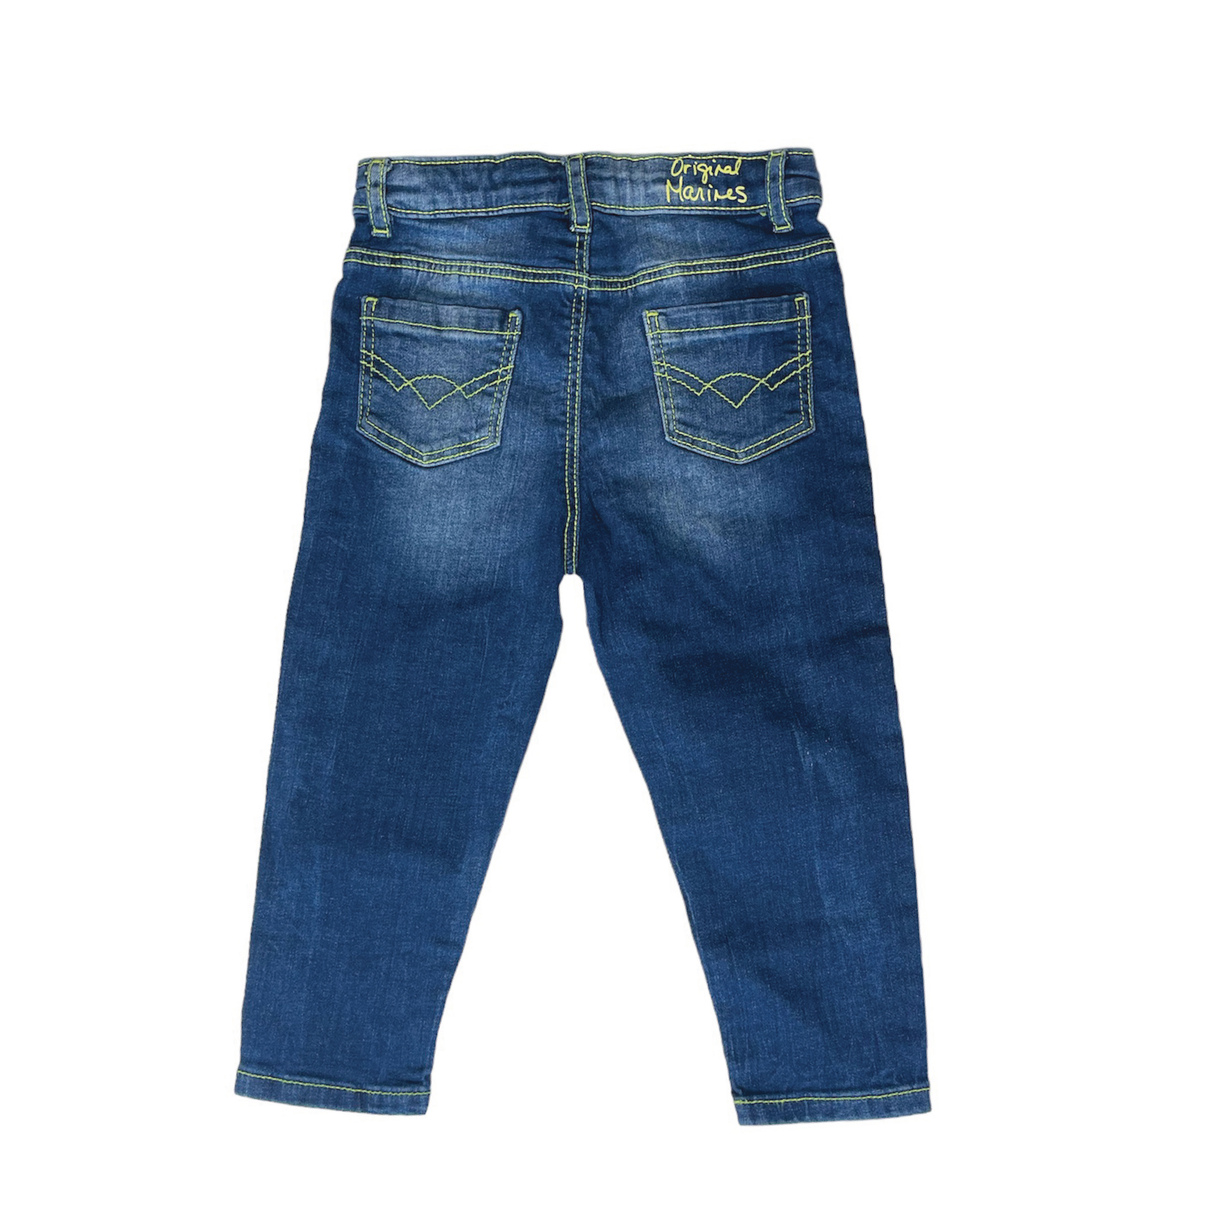 A Second chance - Original MArines Denim 18-24 Months Kids - Delivery All Over Lebanon